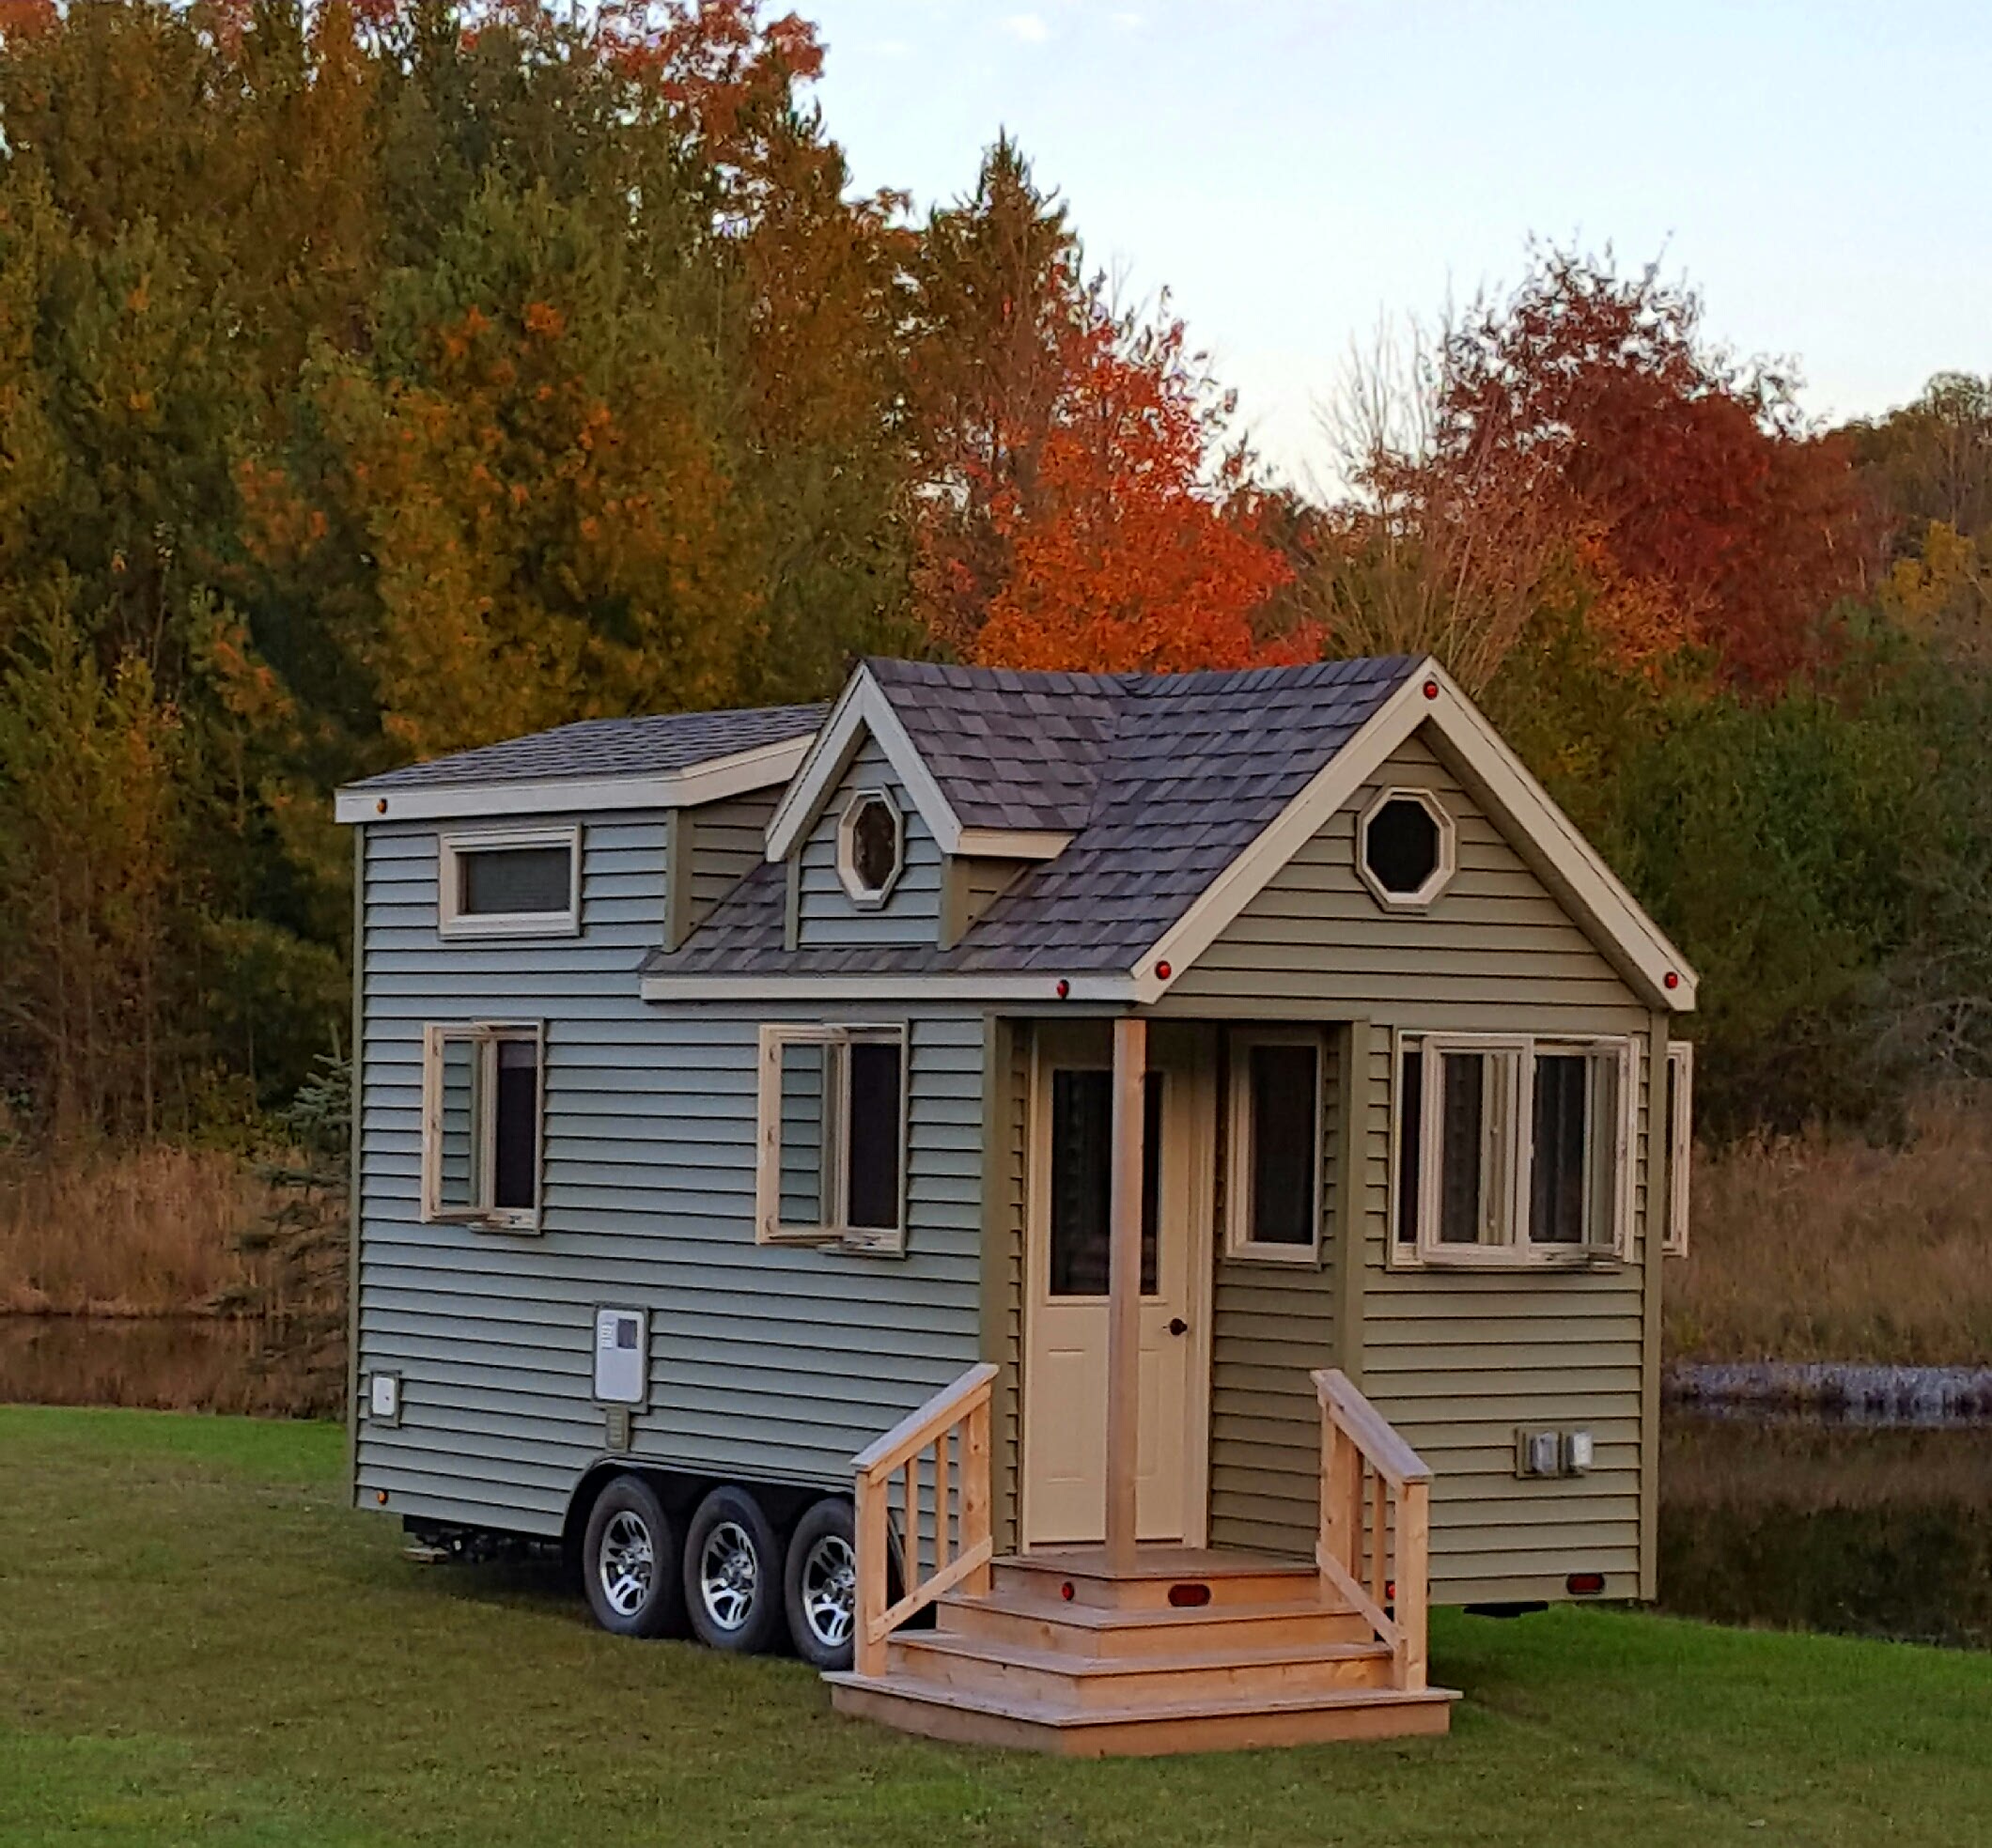 Tiny Home in Autumn